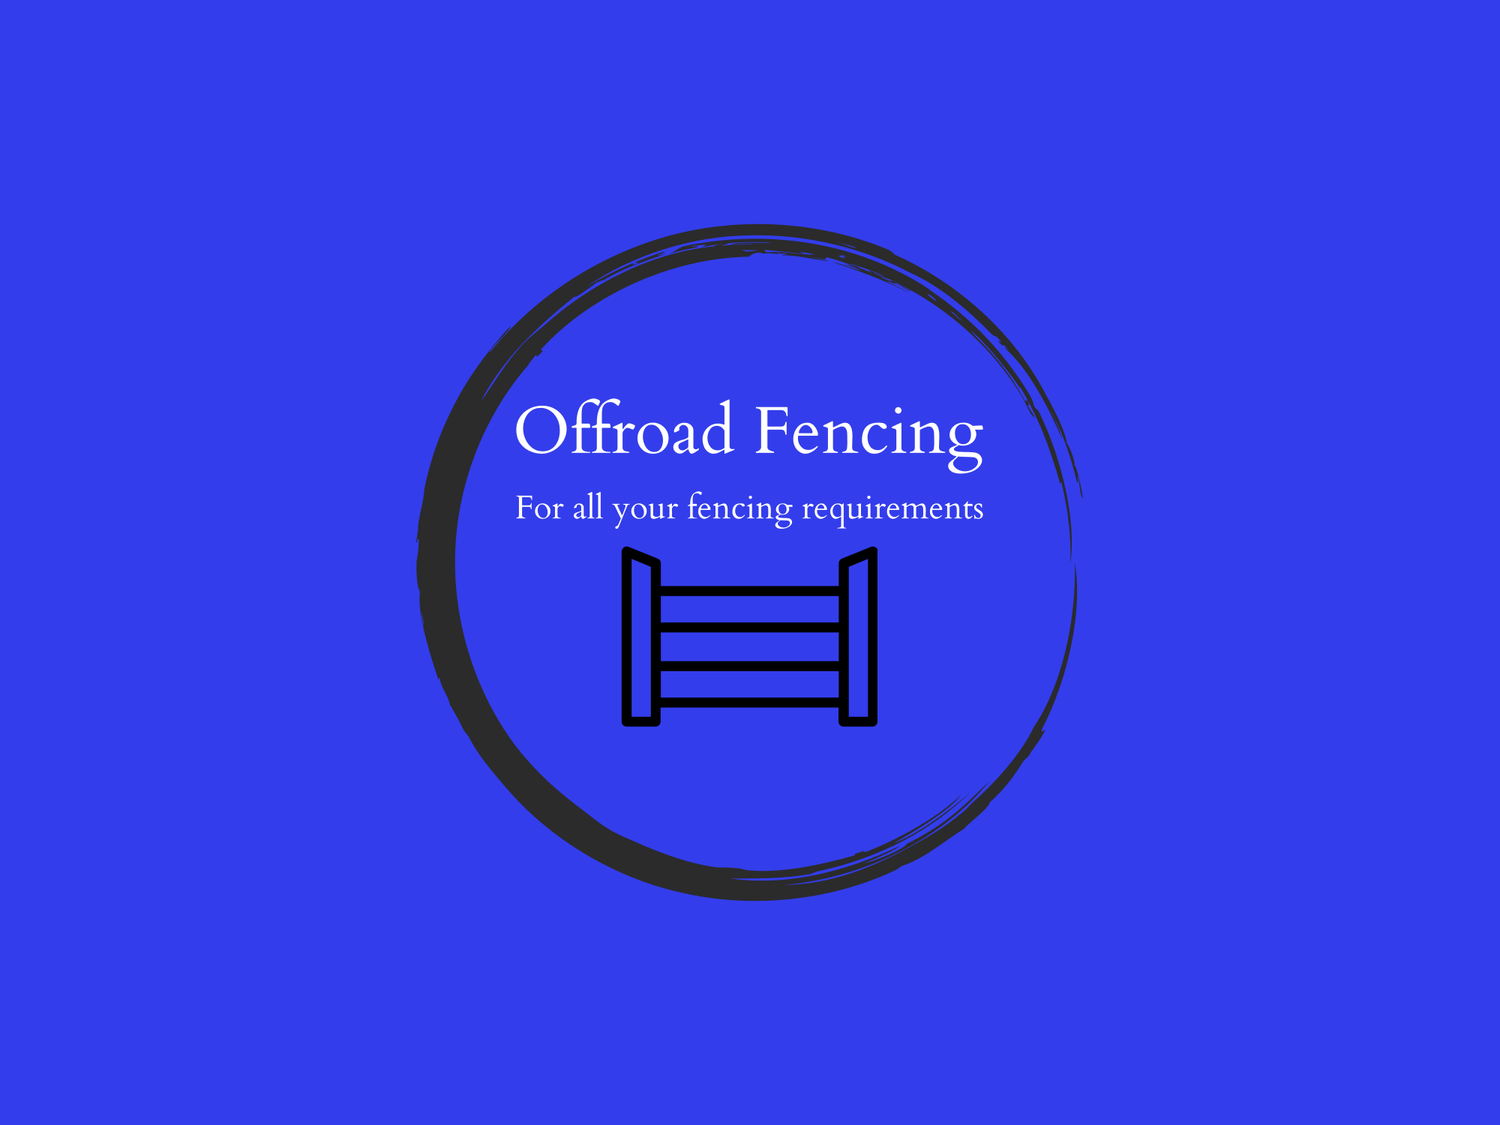 Offroad Fencing